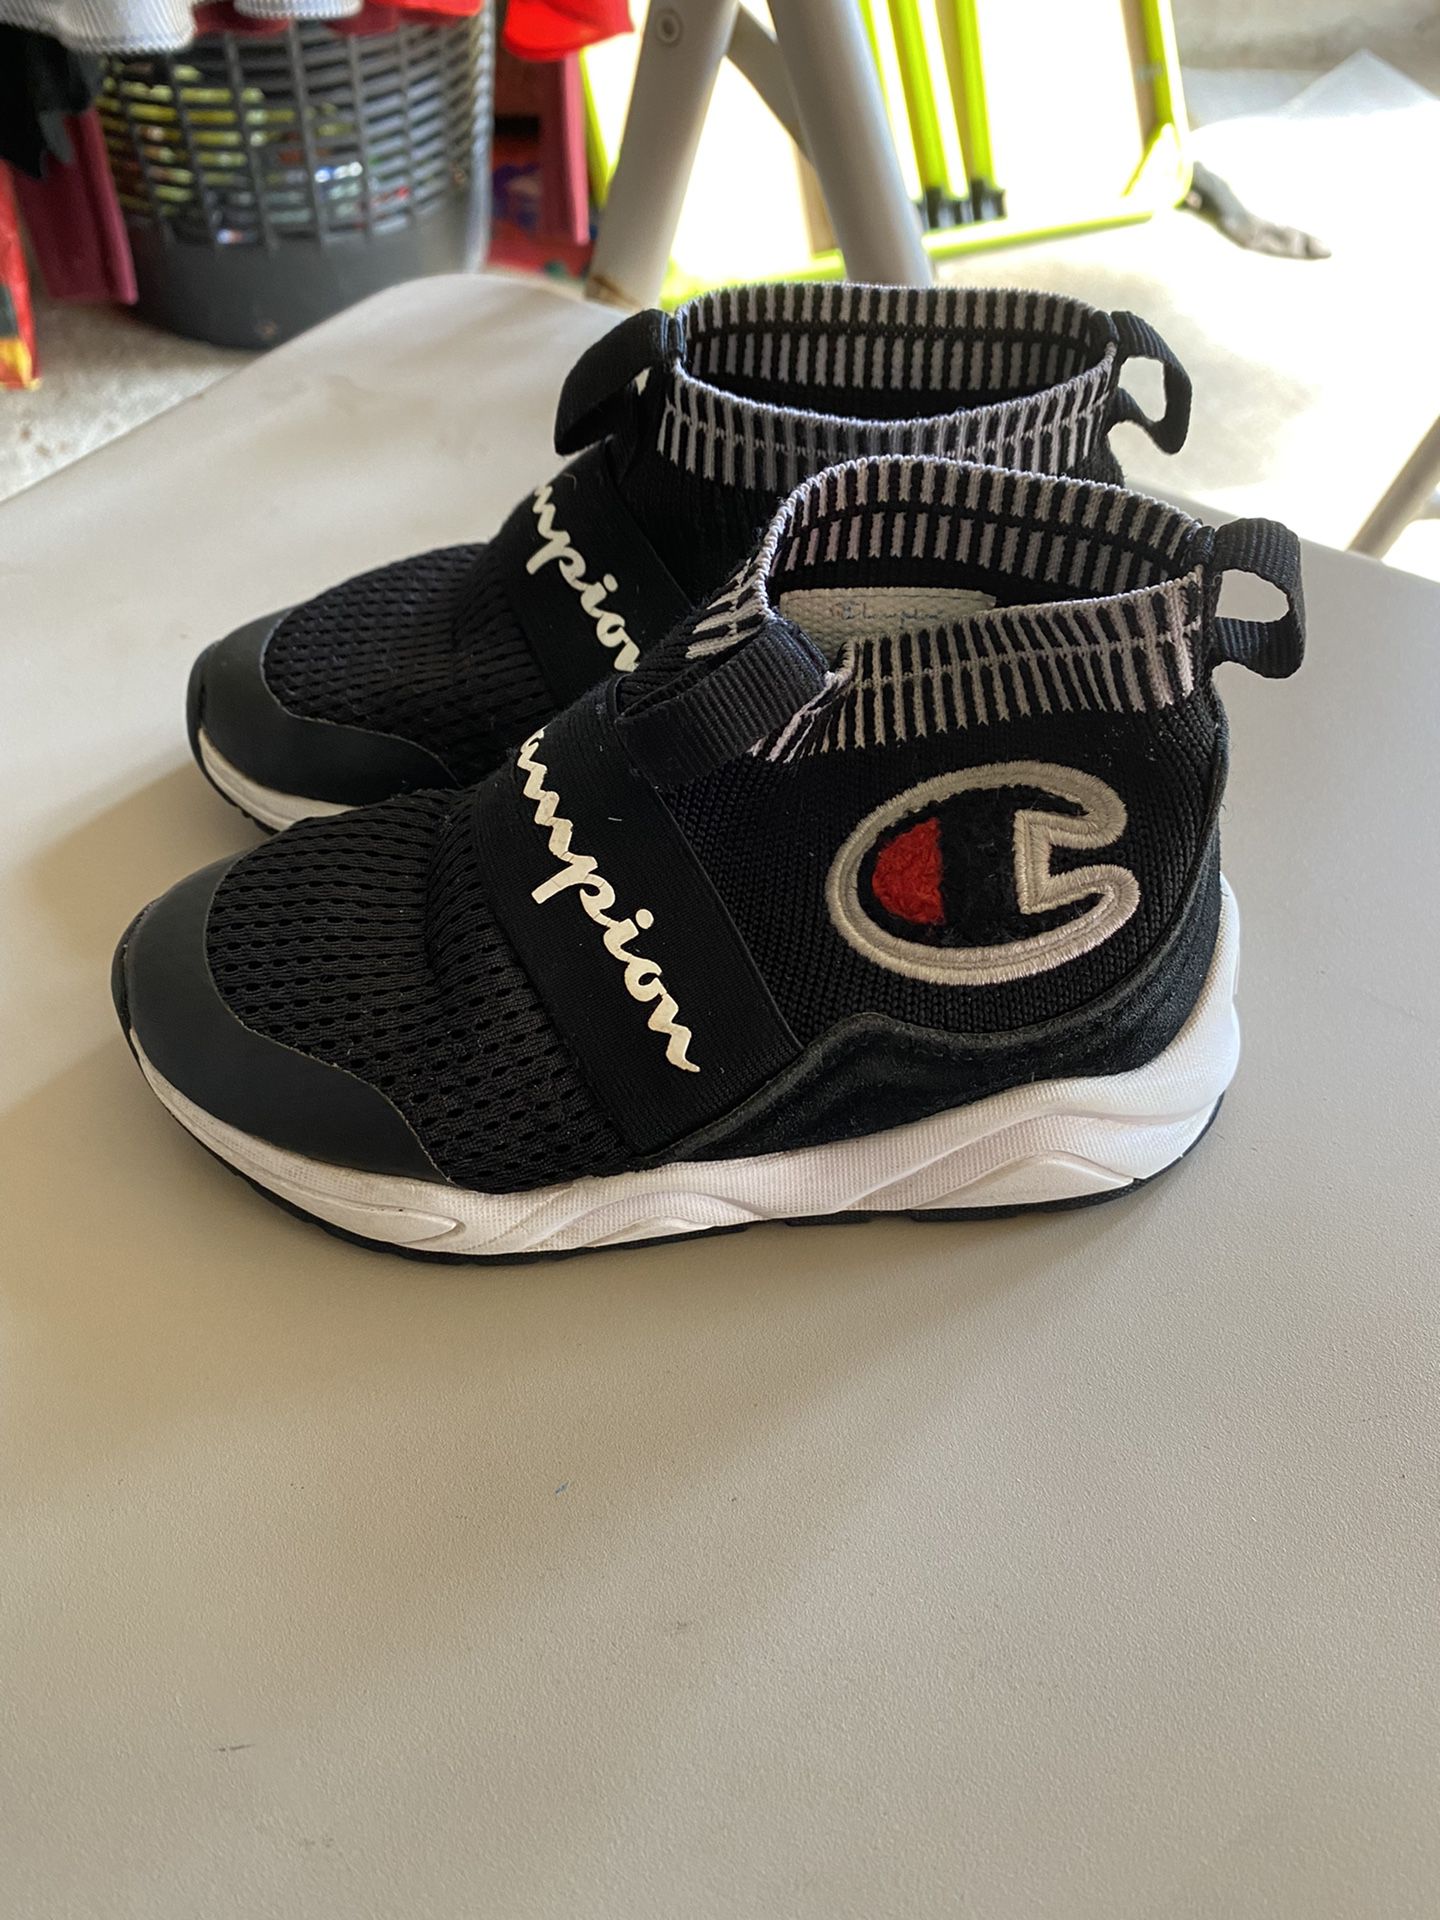 Champion Size 9 Toddler Tennis Excellent Condition  $15 FIRM